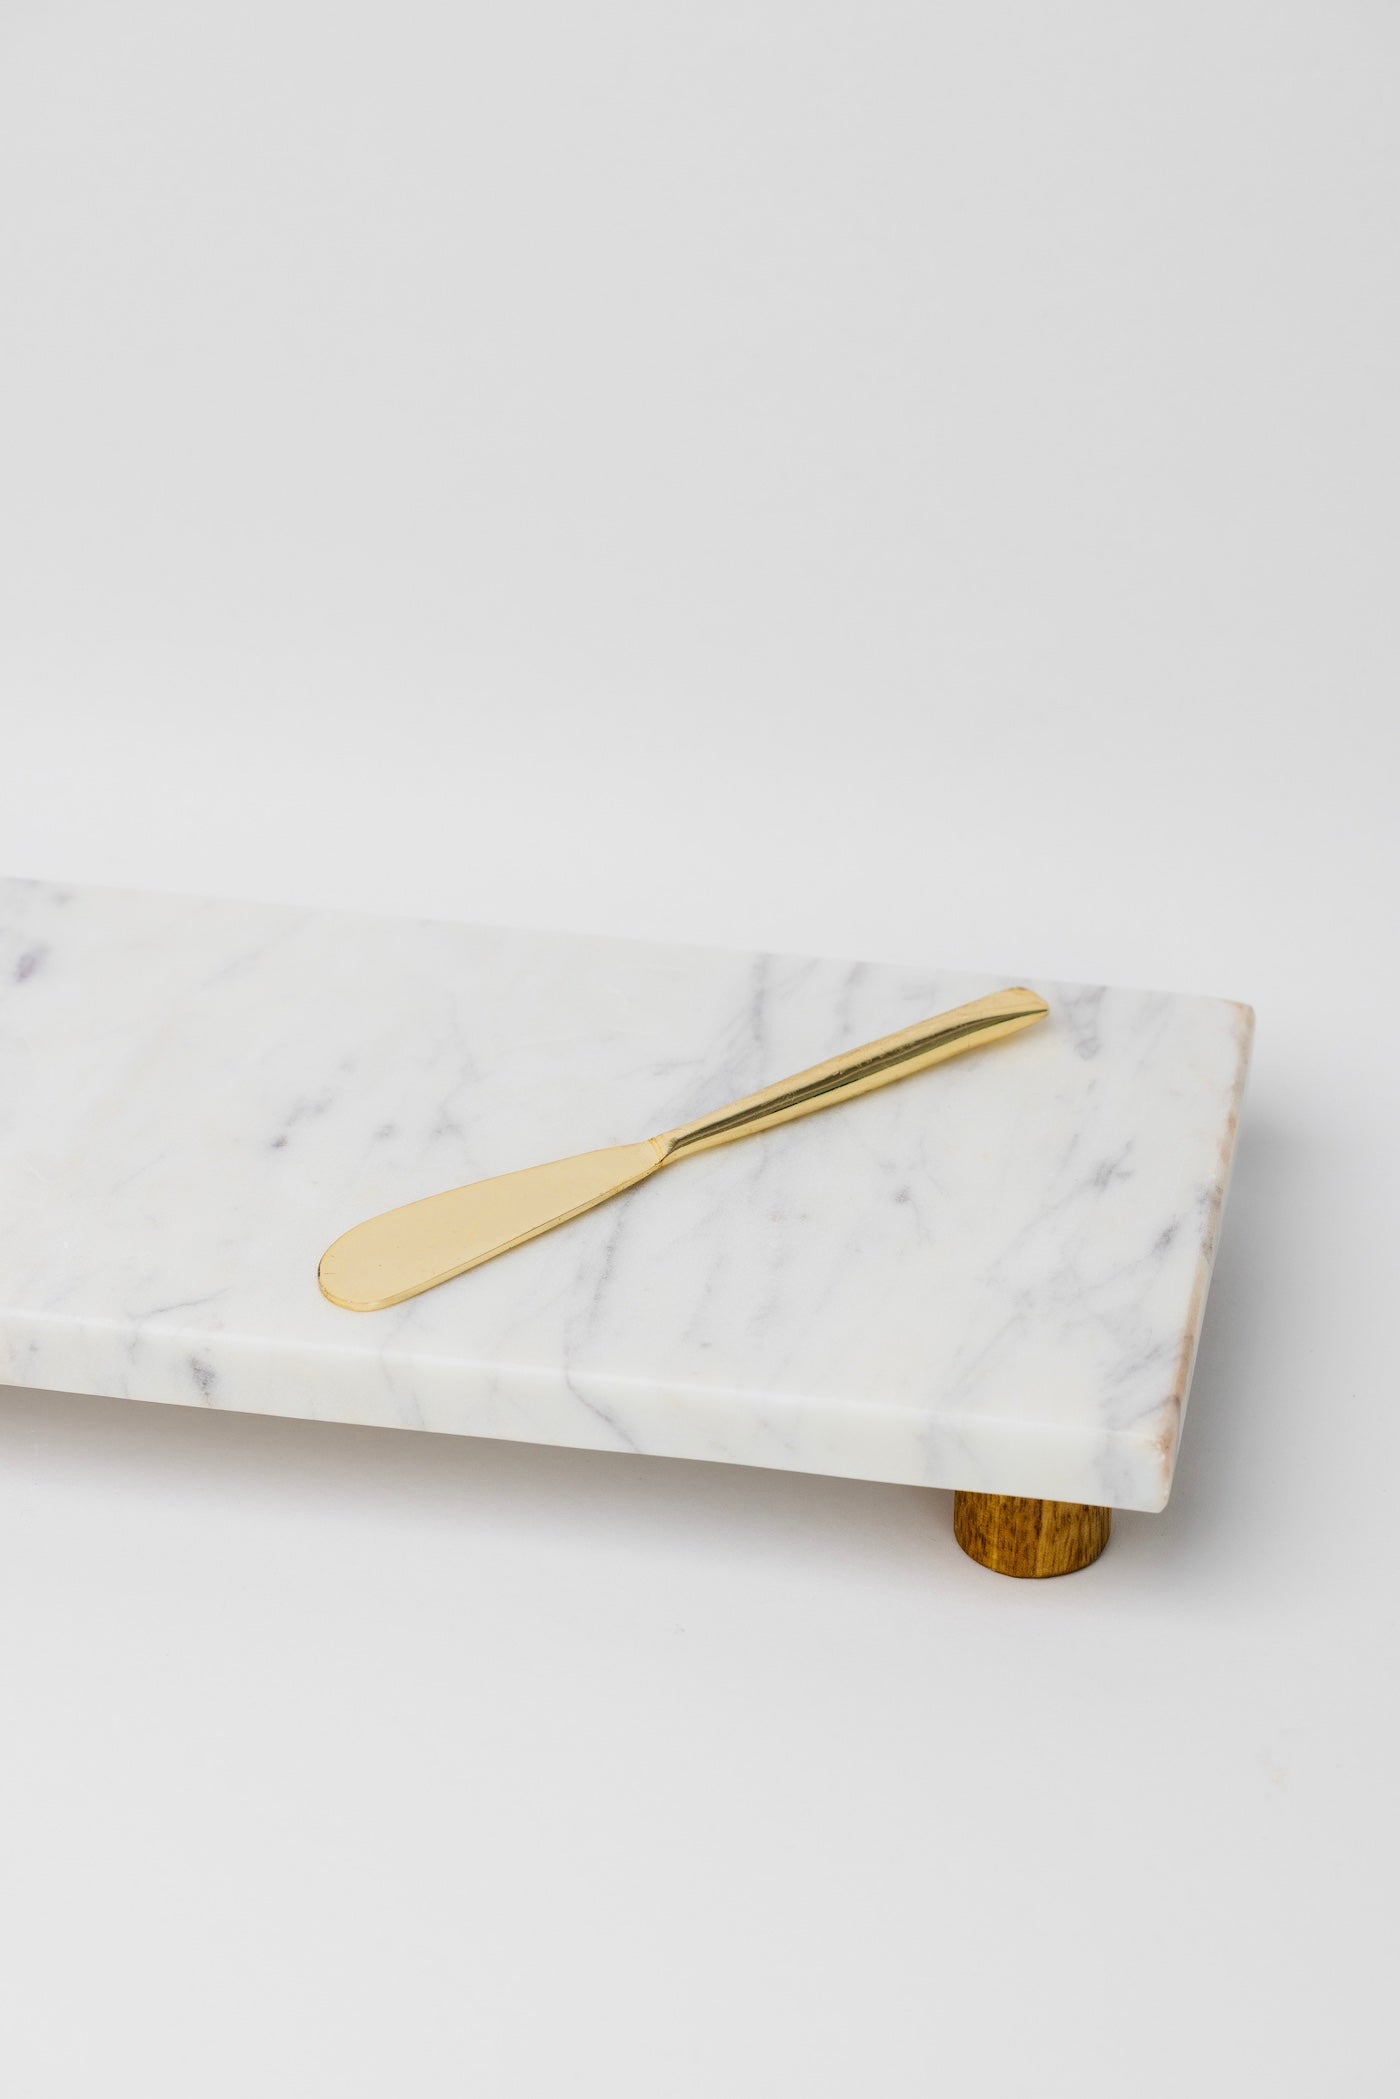 Dixie Footed Marble Board Set